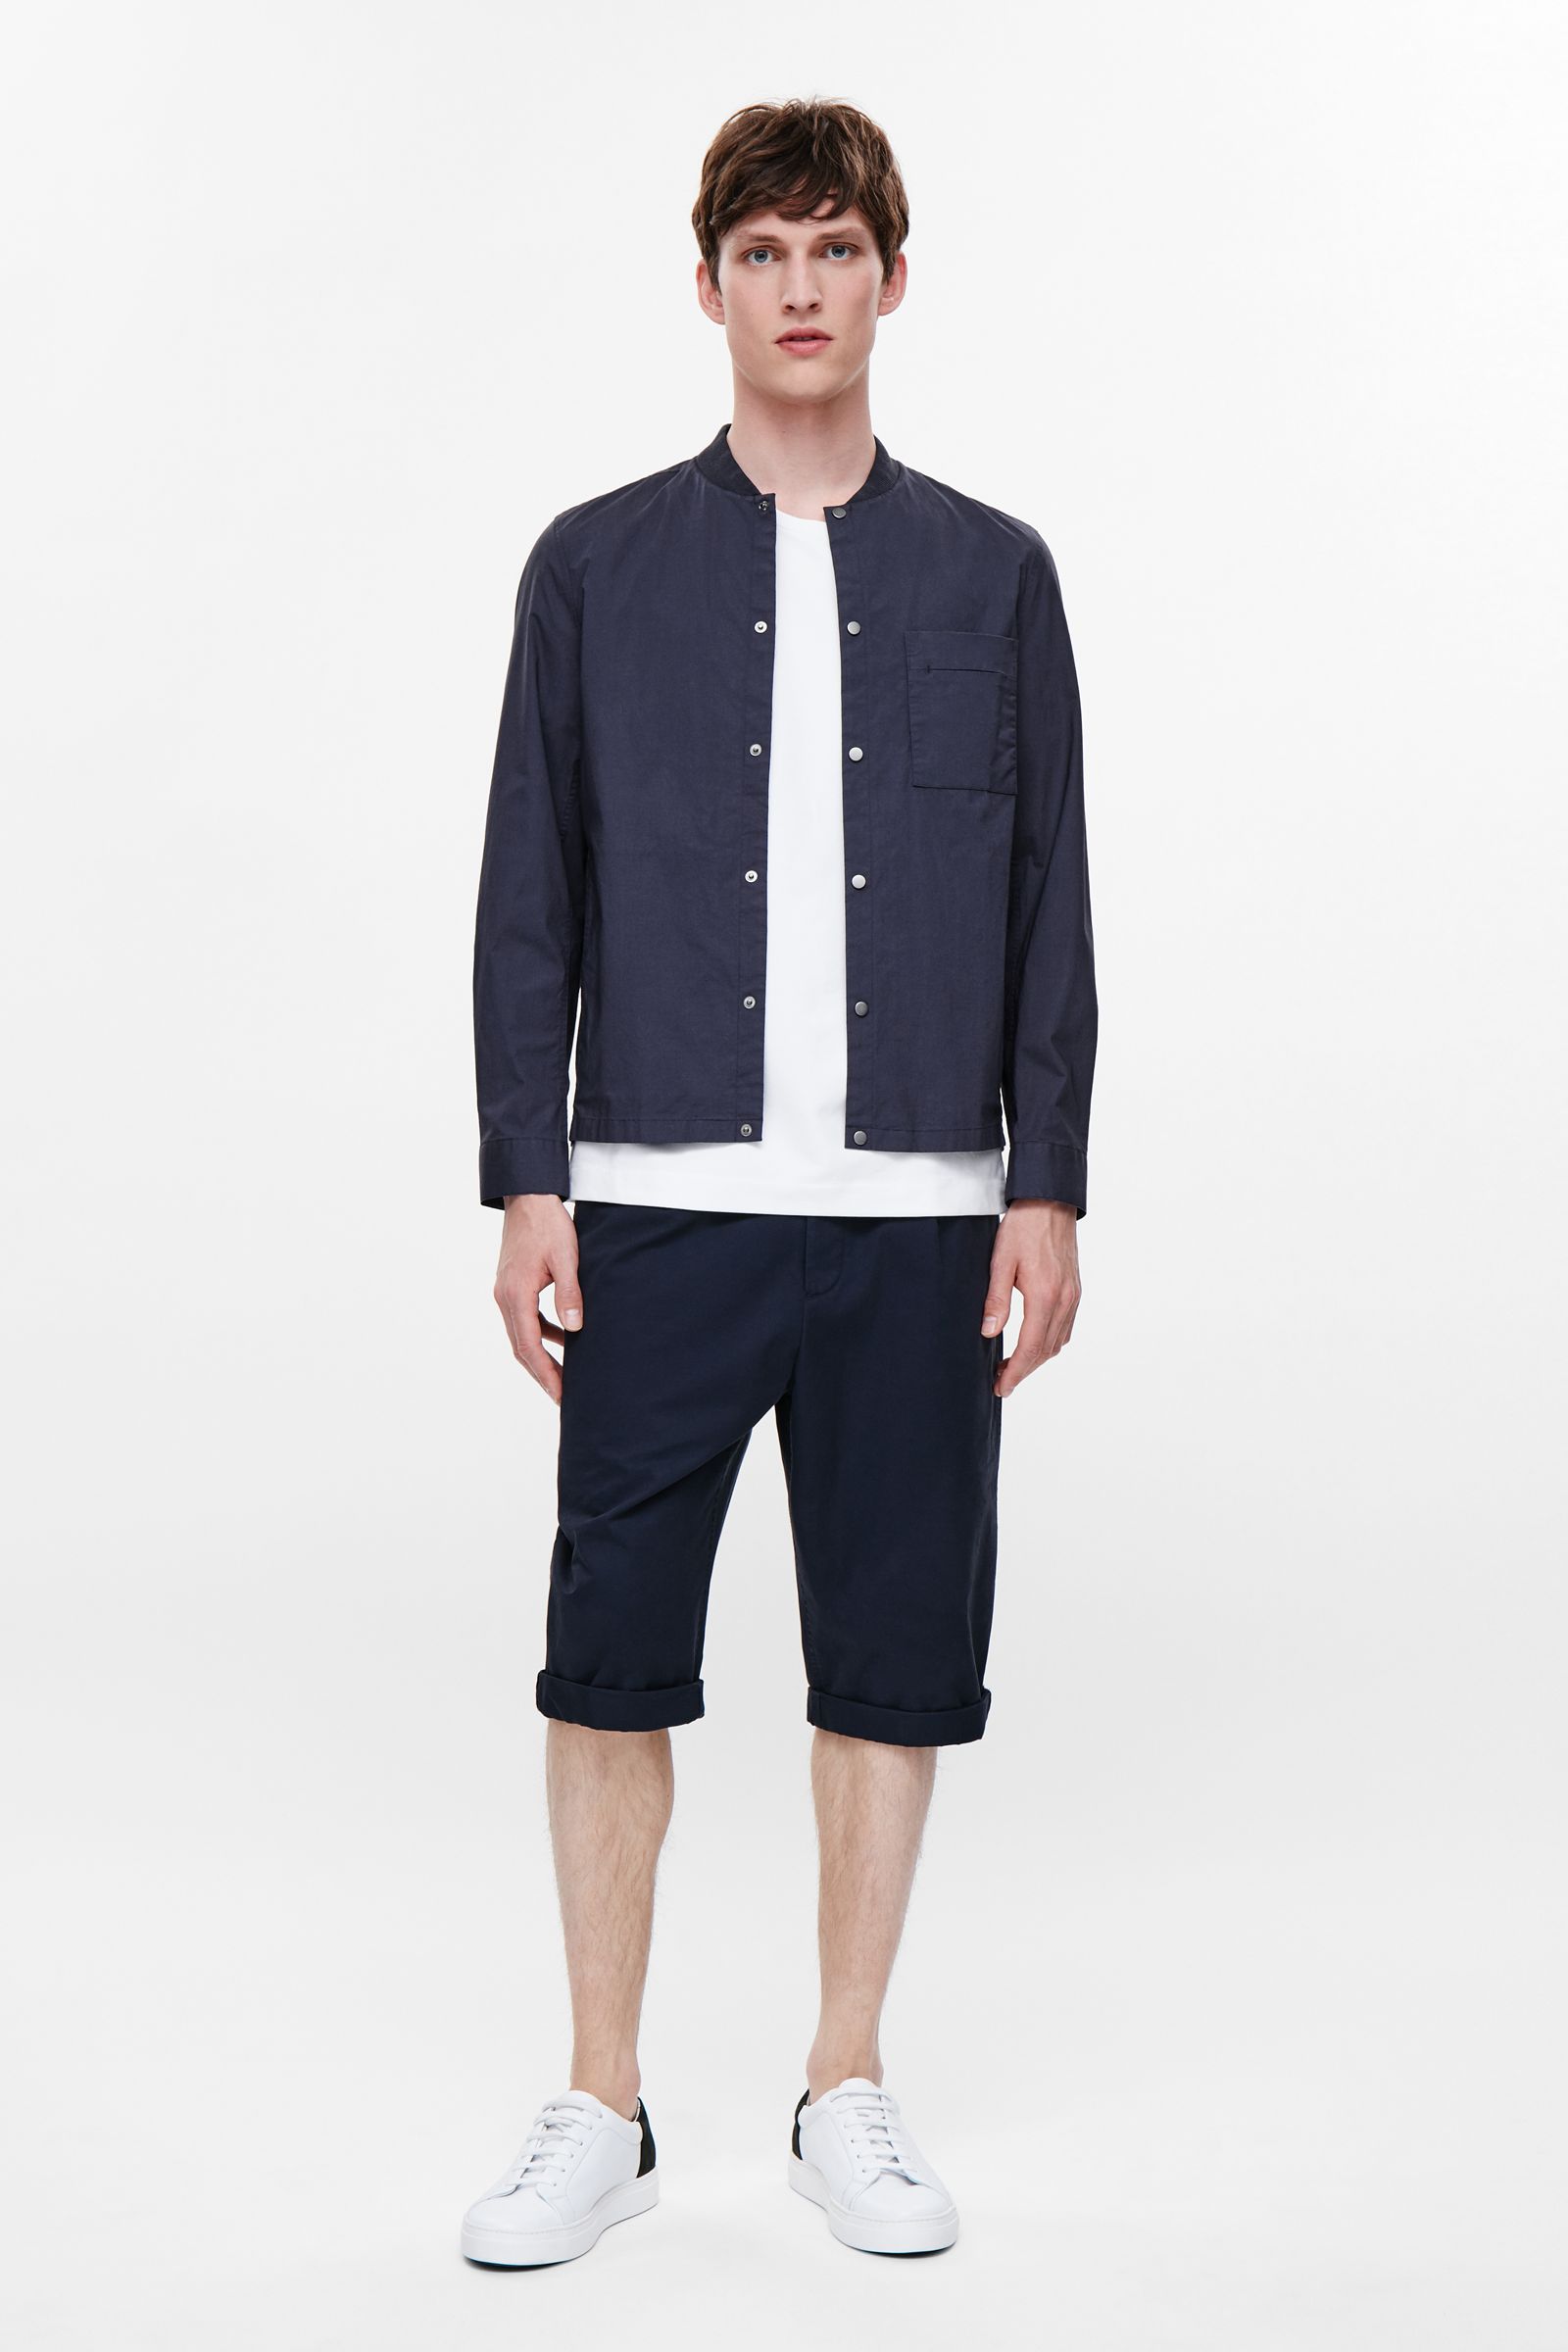 COS stores minimalistisch outfit bomber jackets MAN MAN